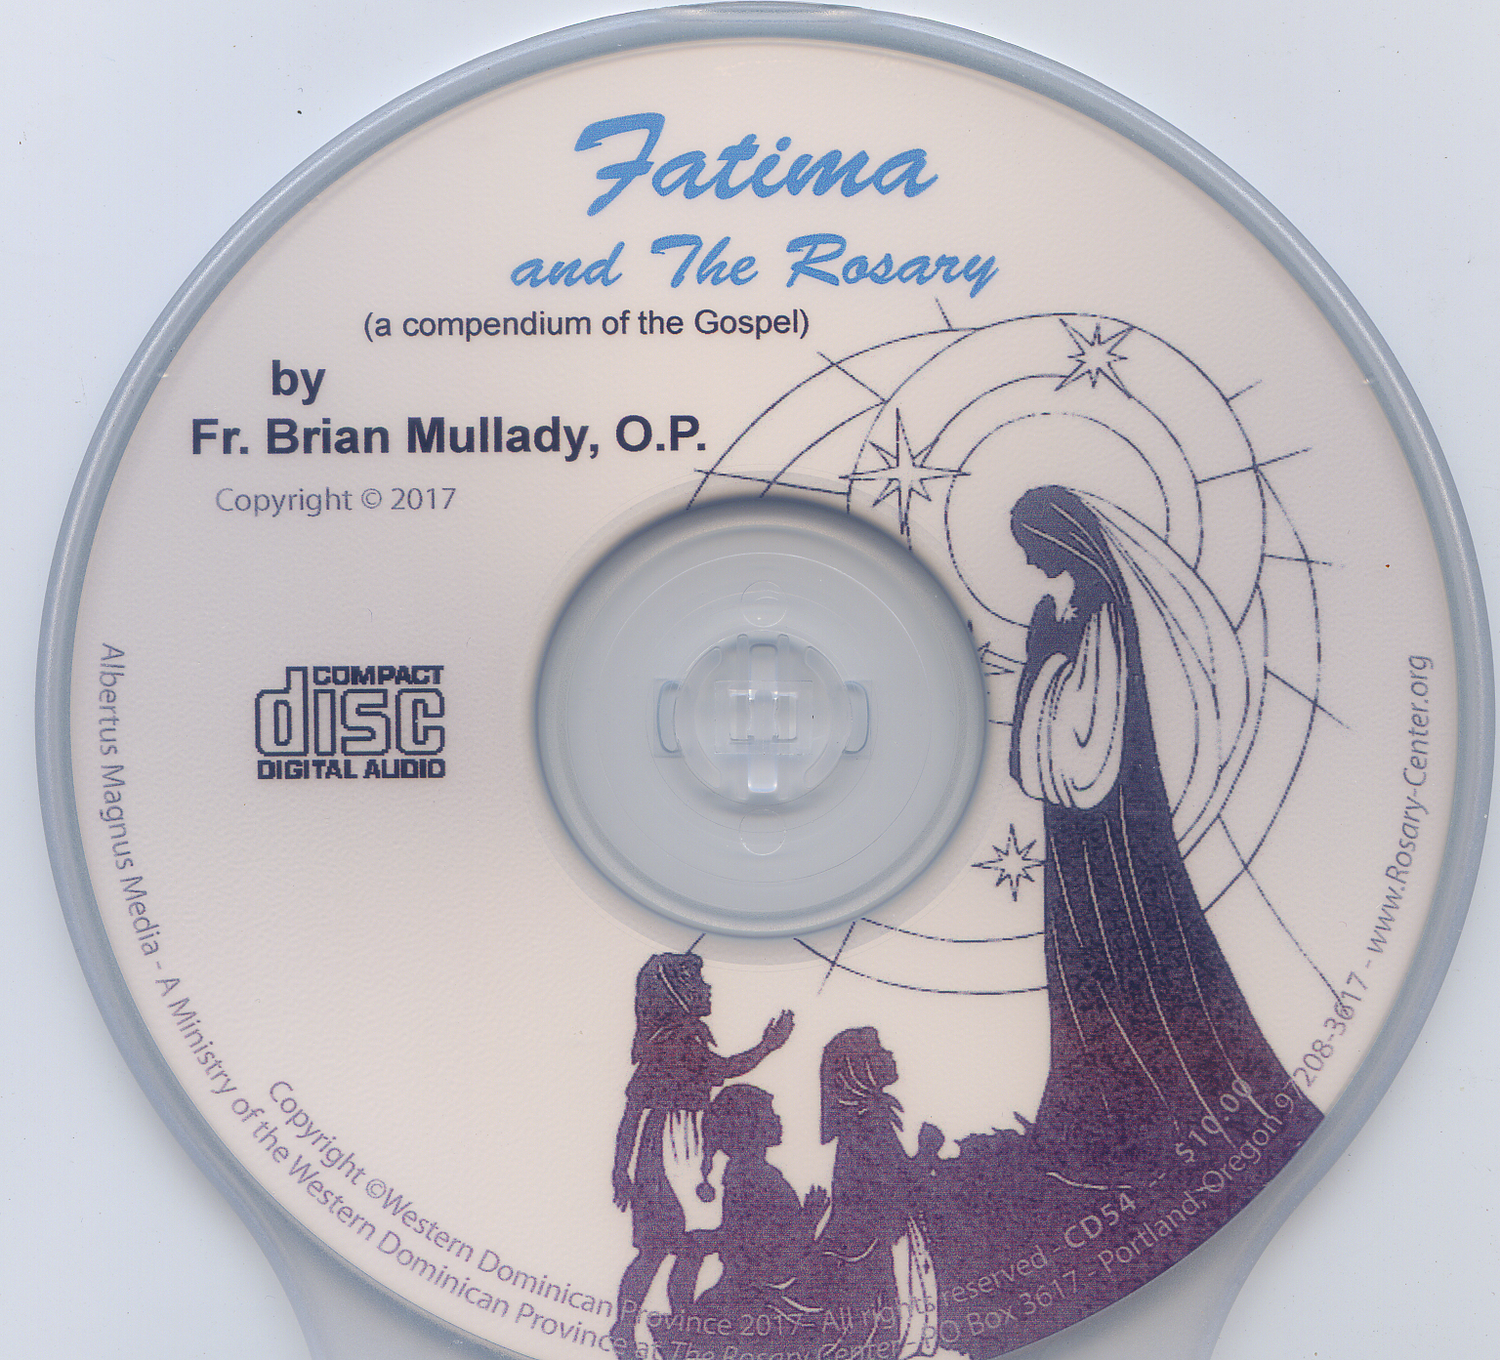 Fatima and the Rosary: A Compendium of the Gospel